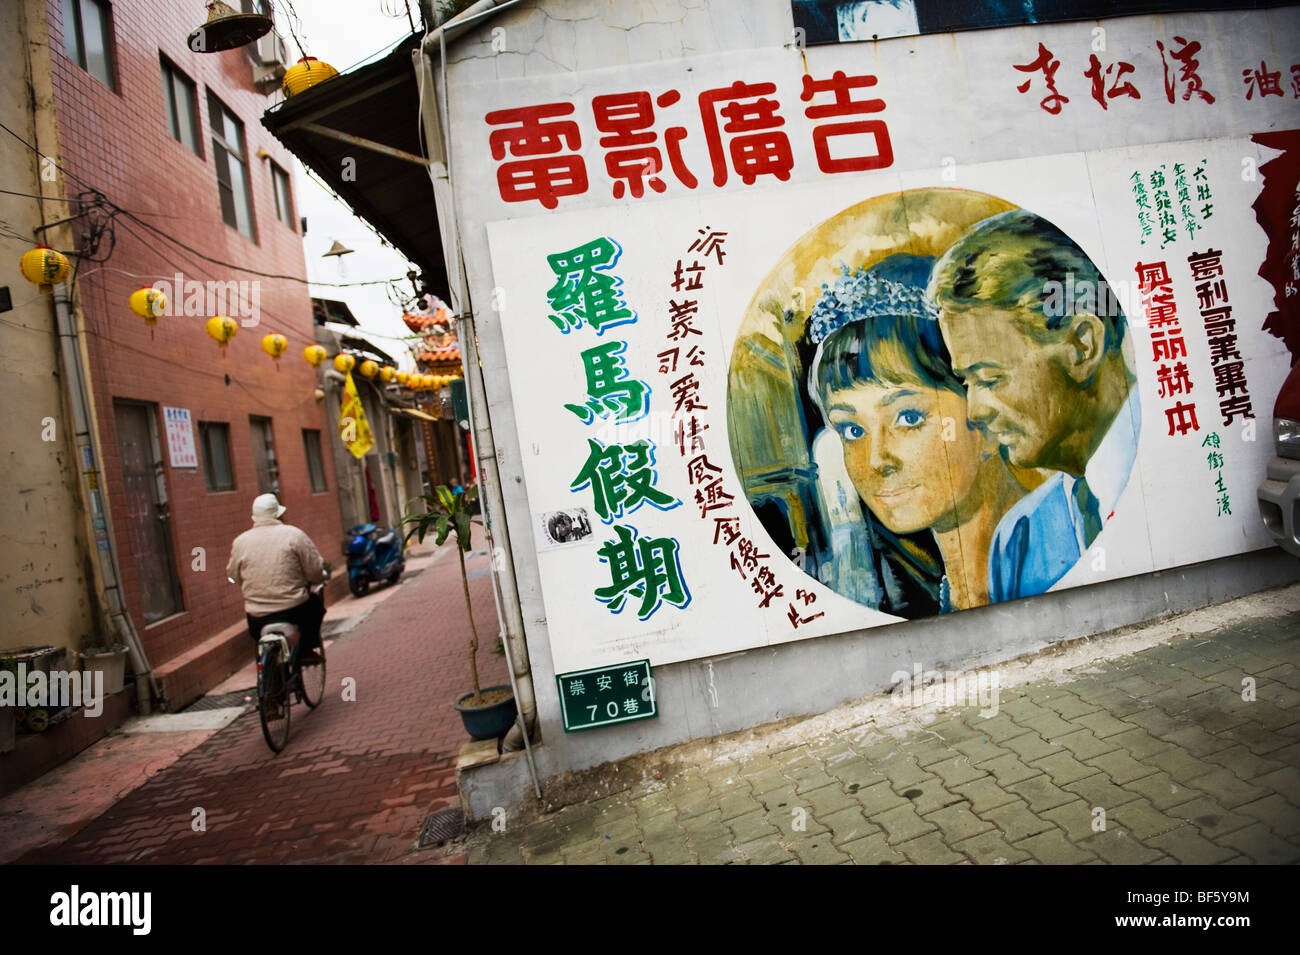 A man on a bicycle rides pass an ad for an Audrey Hepburn movie in Taipei, Taiwan. Stock Photo